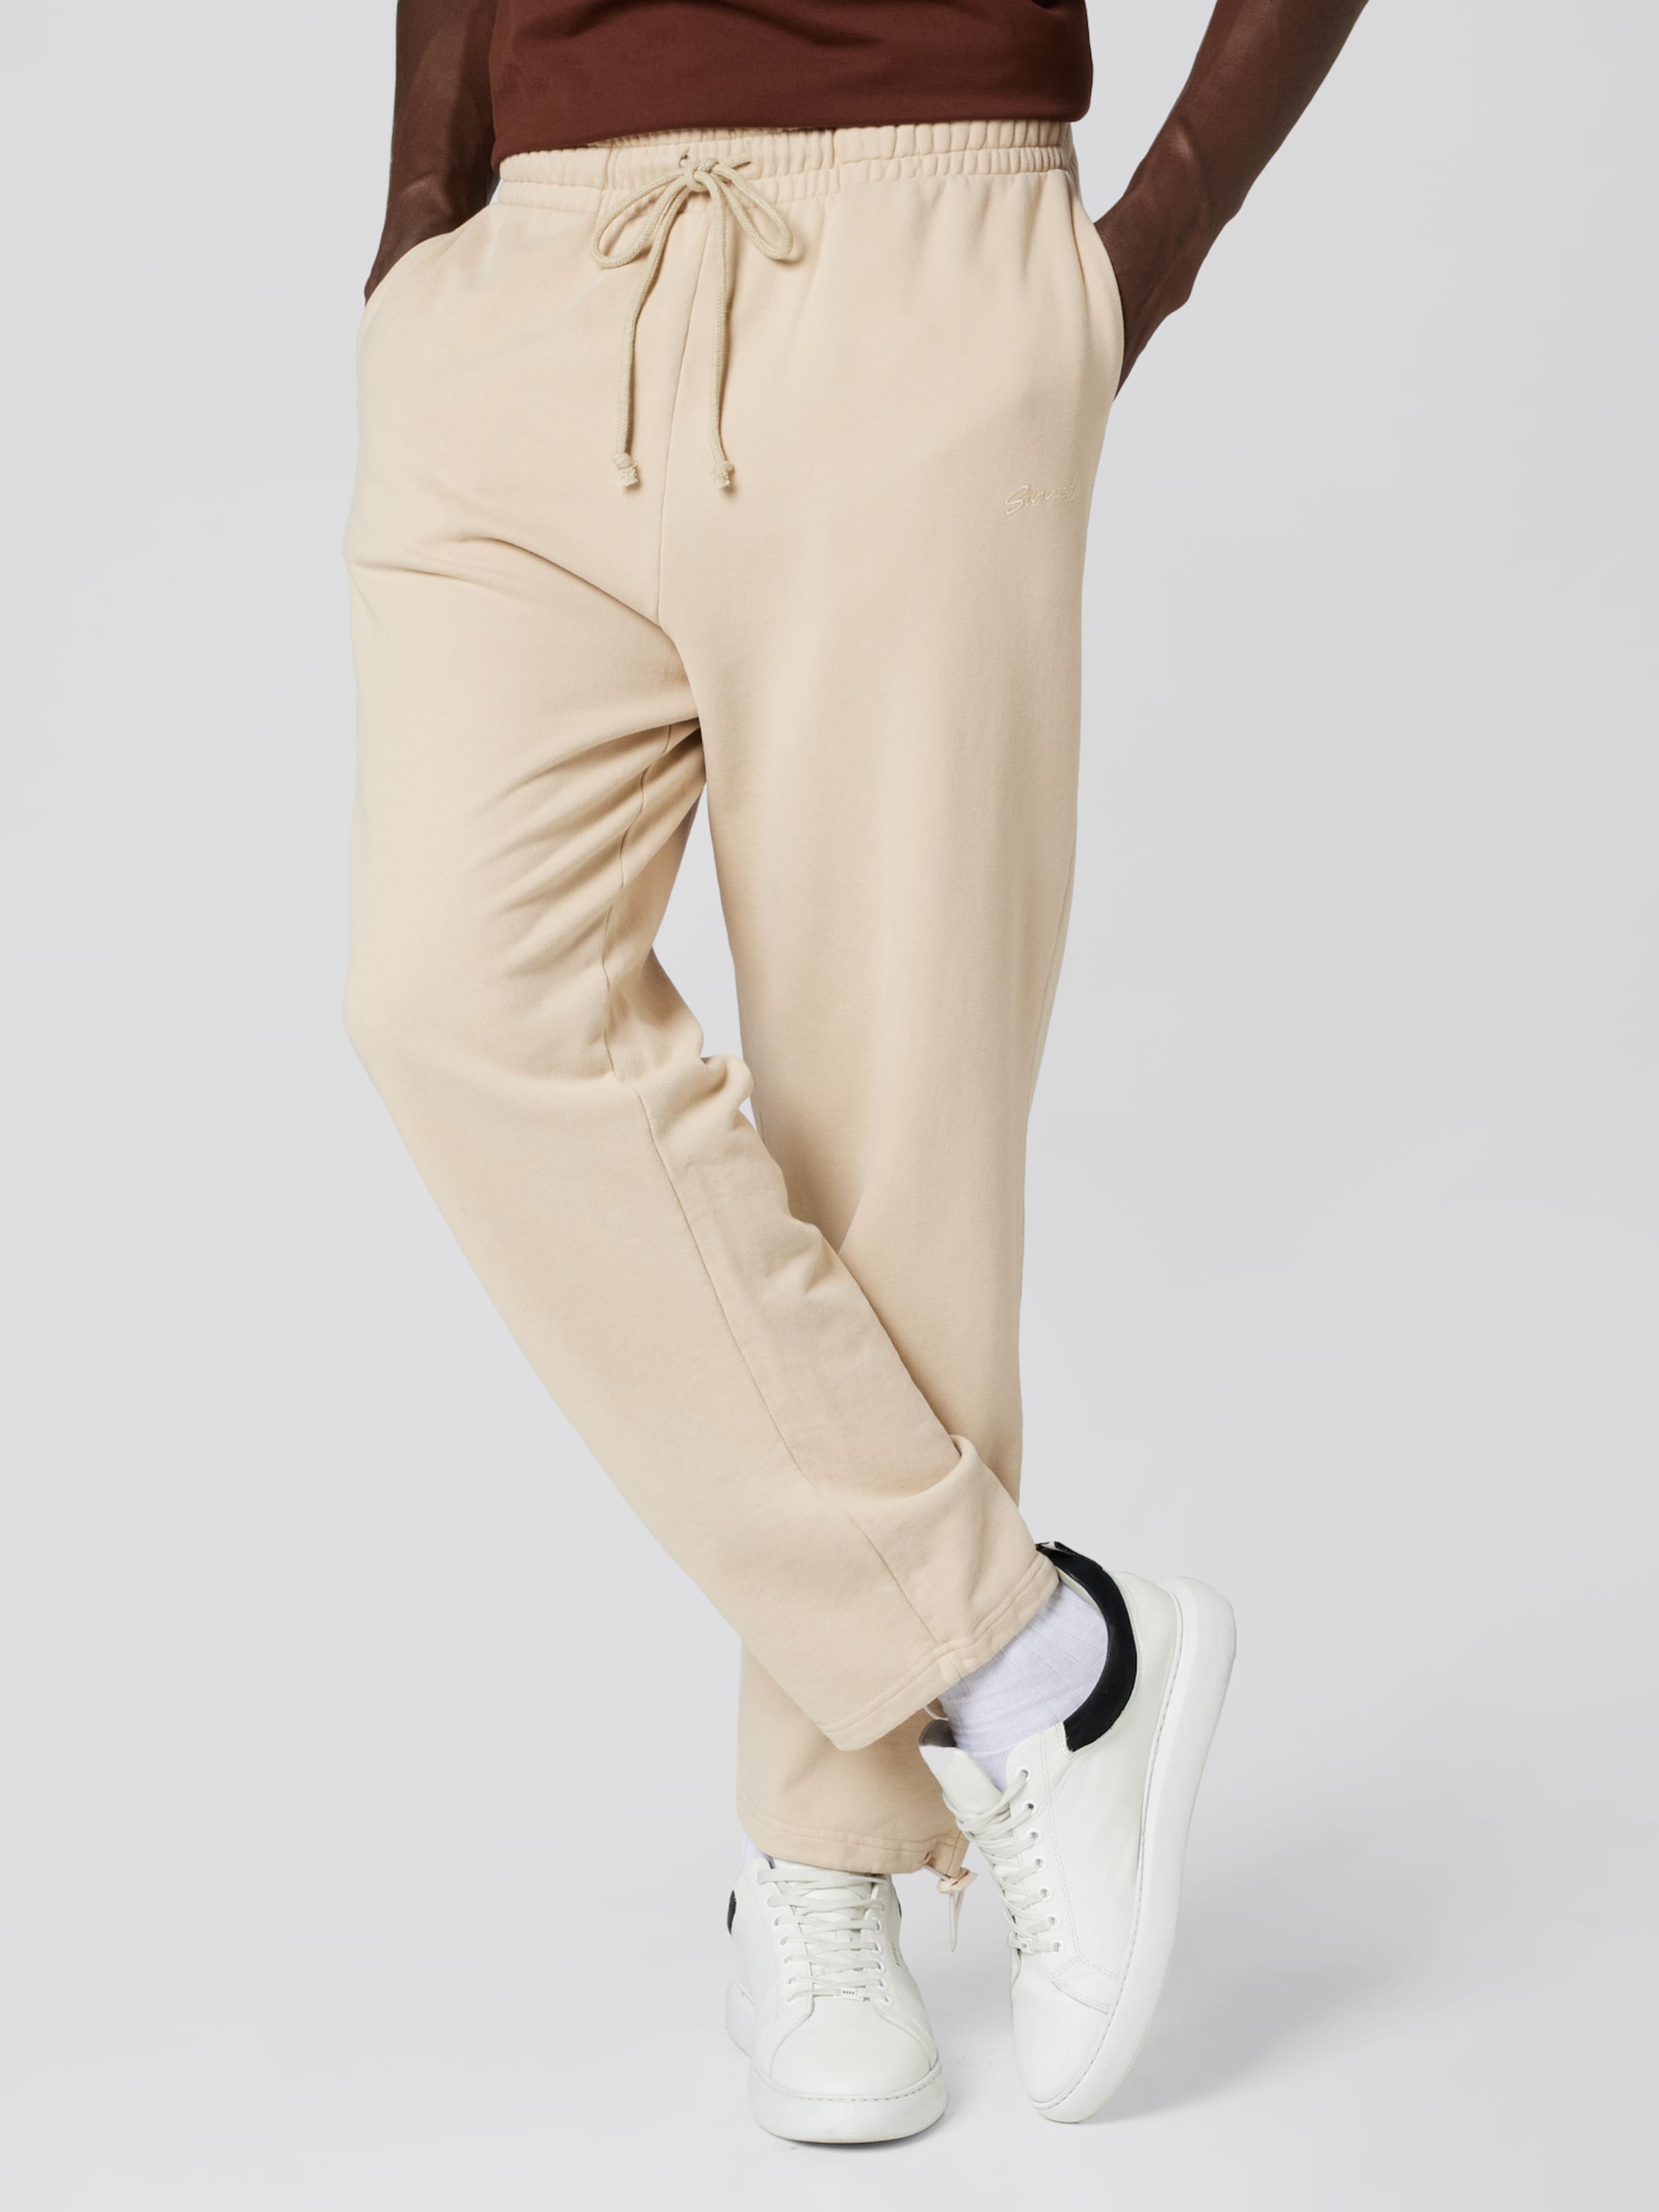 Sinned x ABOUT YOU Trousers 'Milo' in Beige | ABOUT YOU